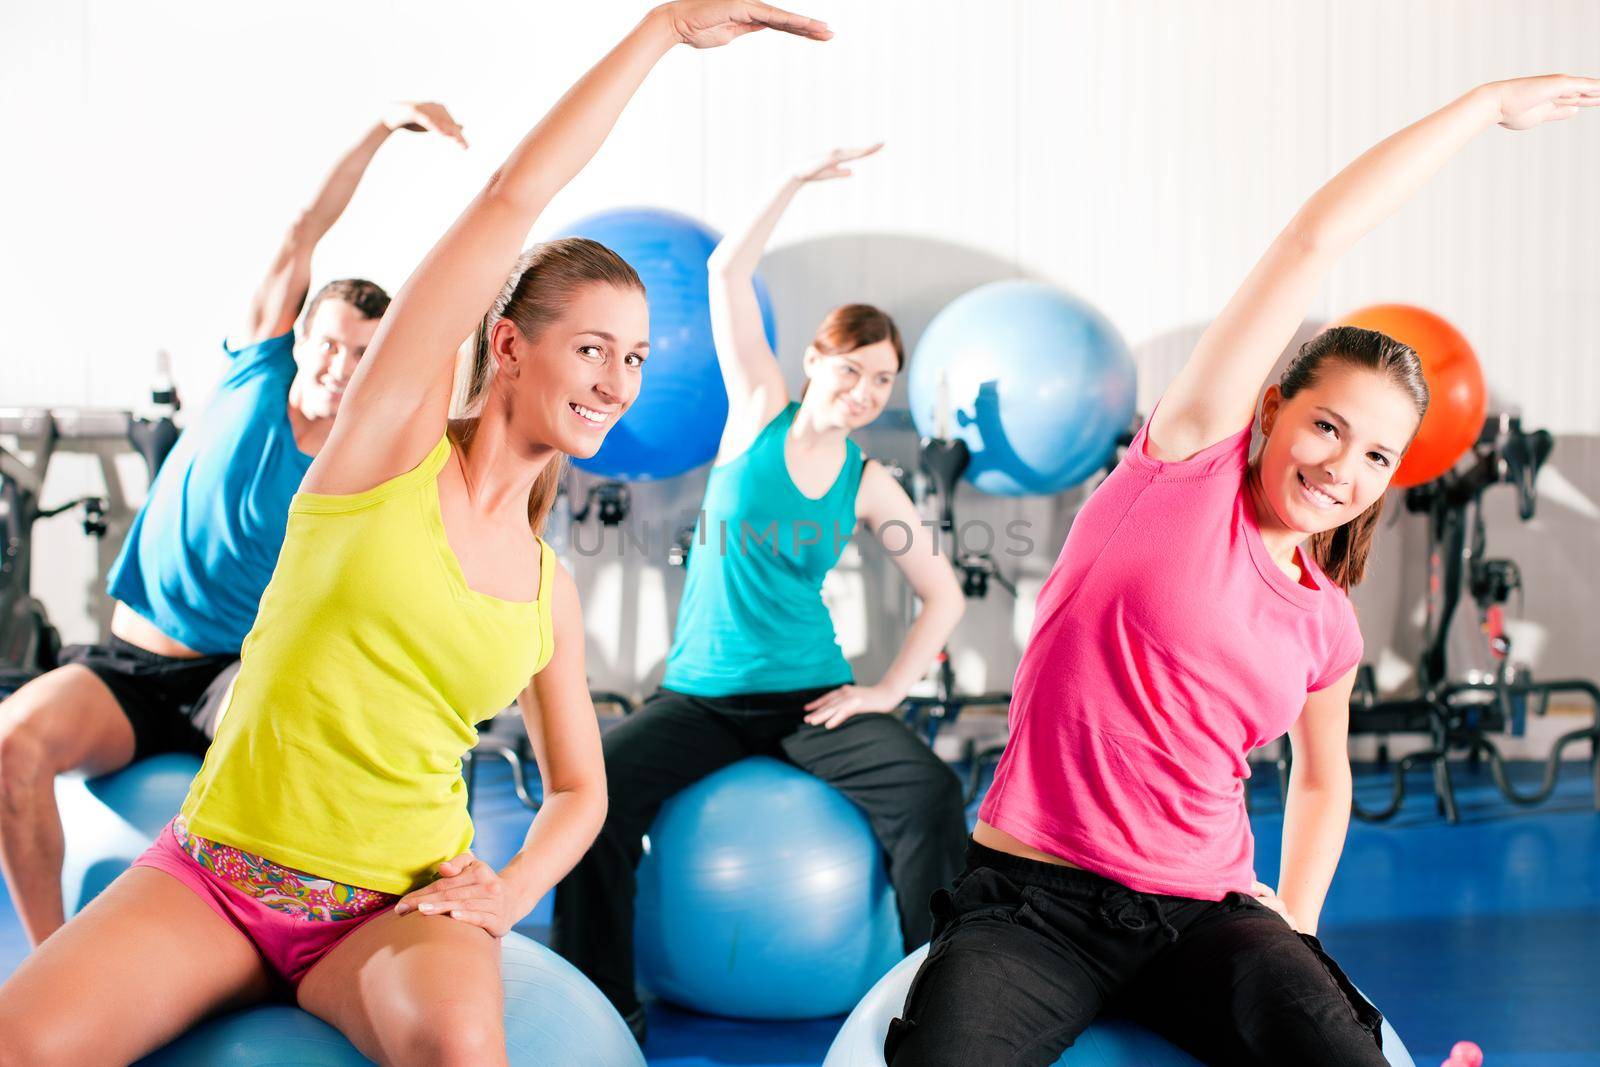 People in gym on exercise ball by Kzenon